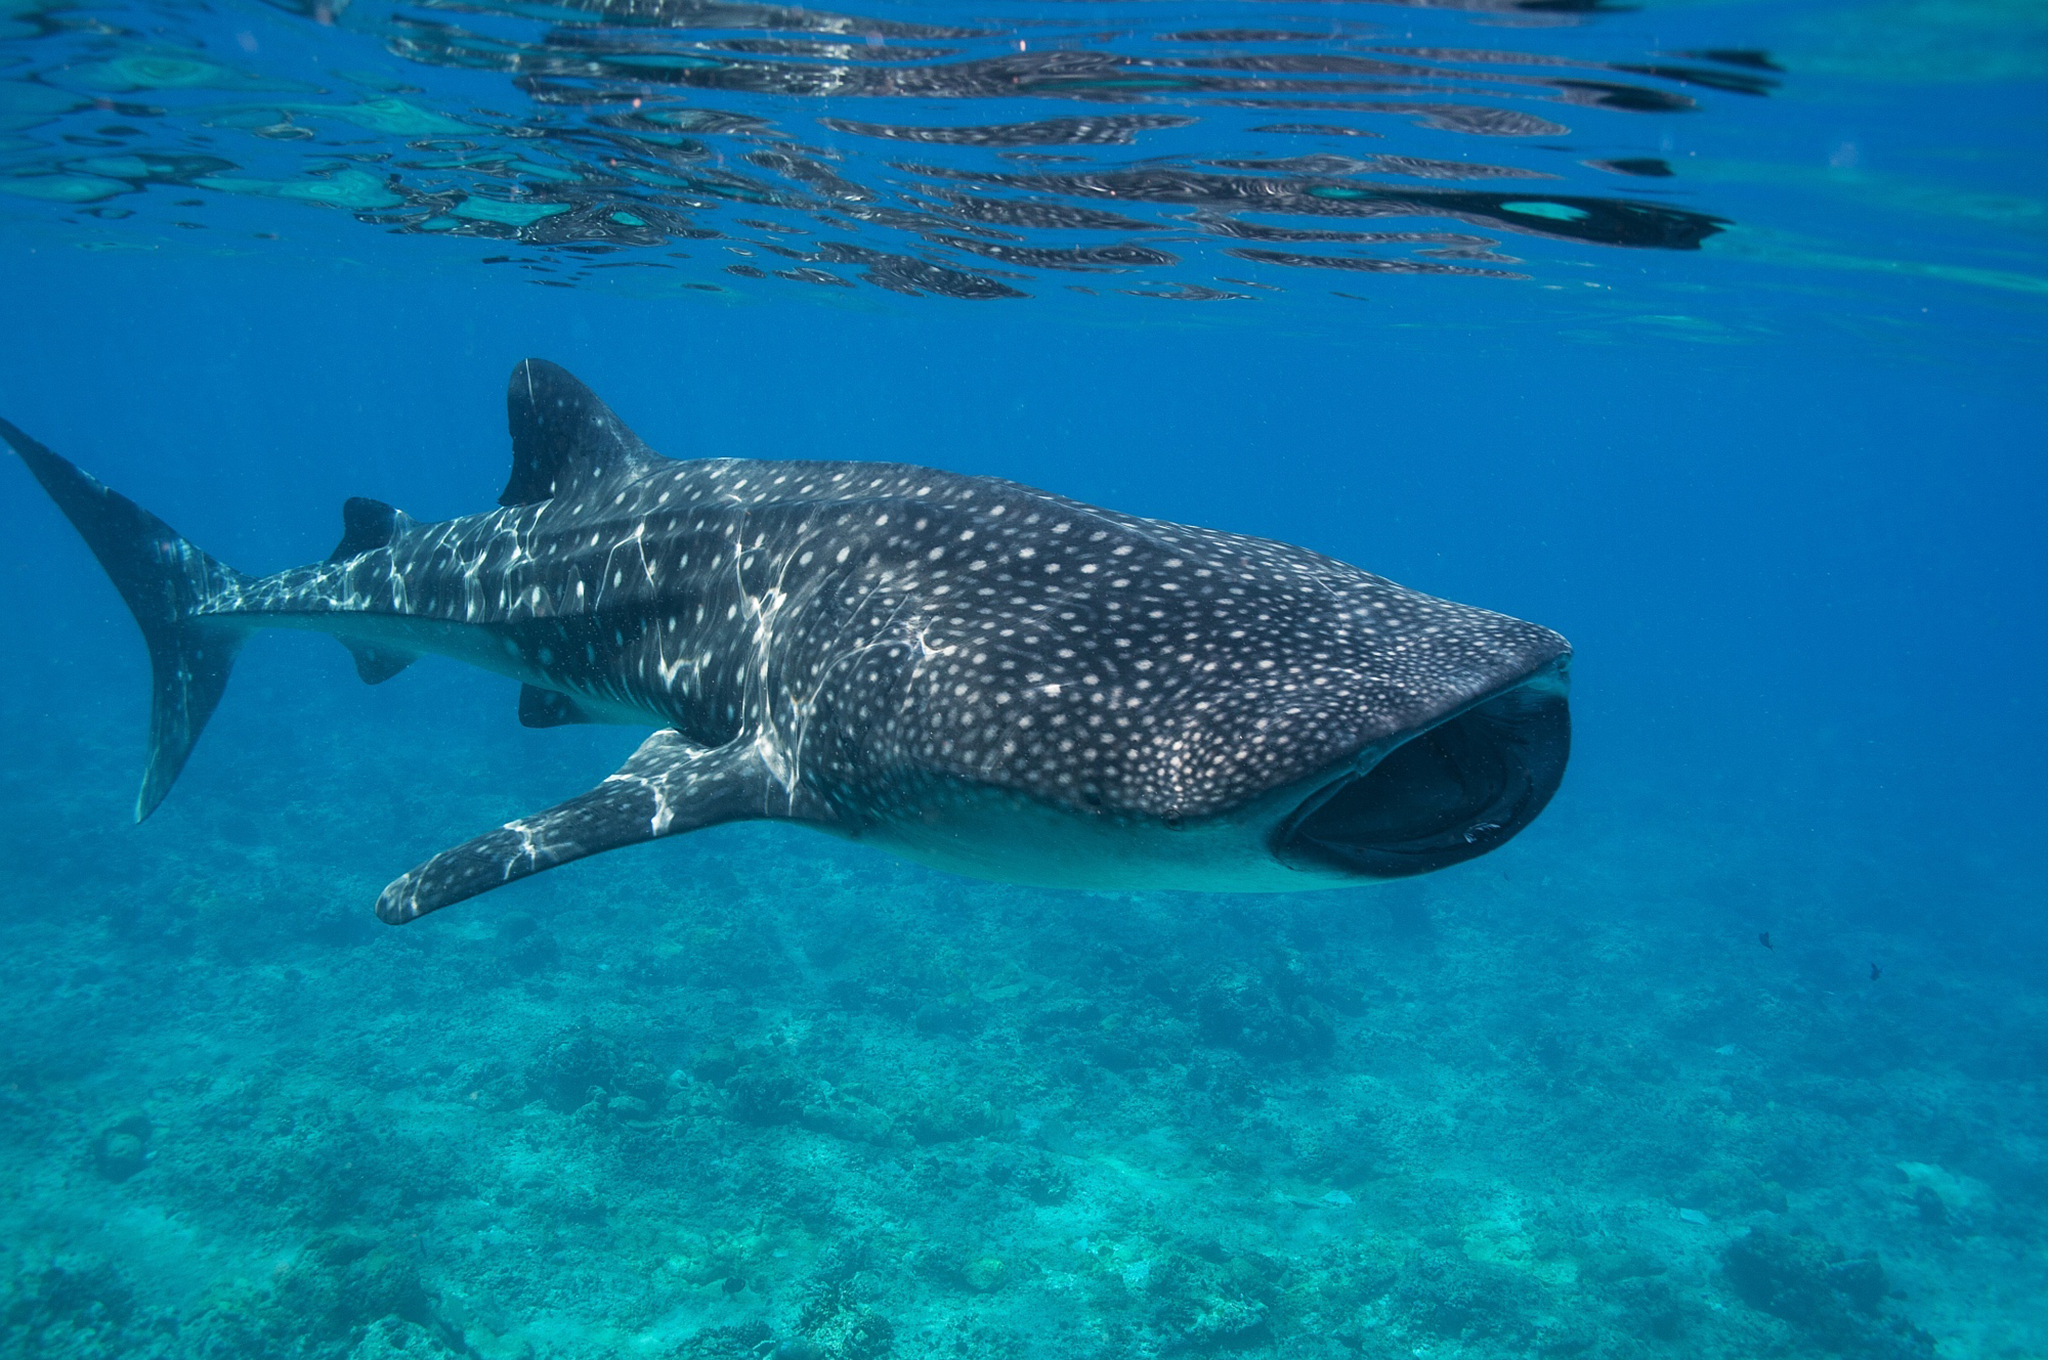 Undated Maldives Whale Shark Research Programme handout photo of a whale shark in the Maldives, as new research suggests that they are making unexpectedly big waves in the world of ecotourism